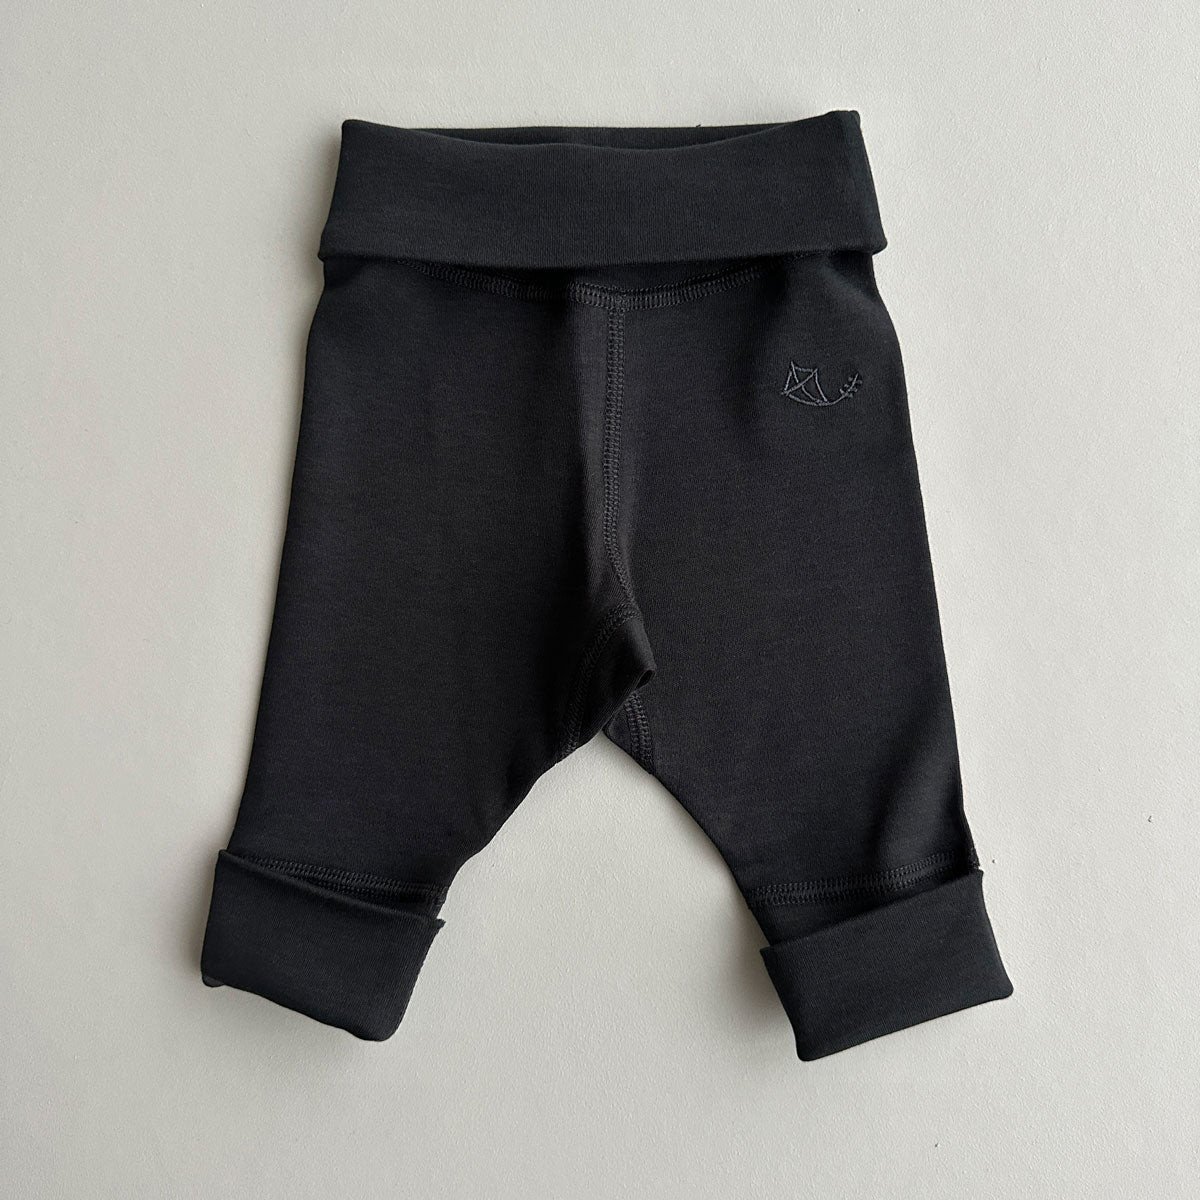 Annecy Baby pants